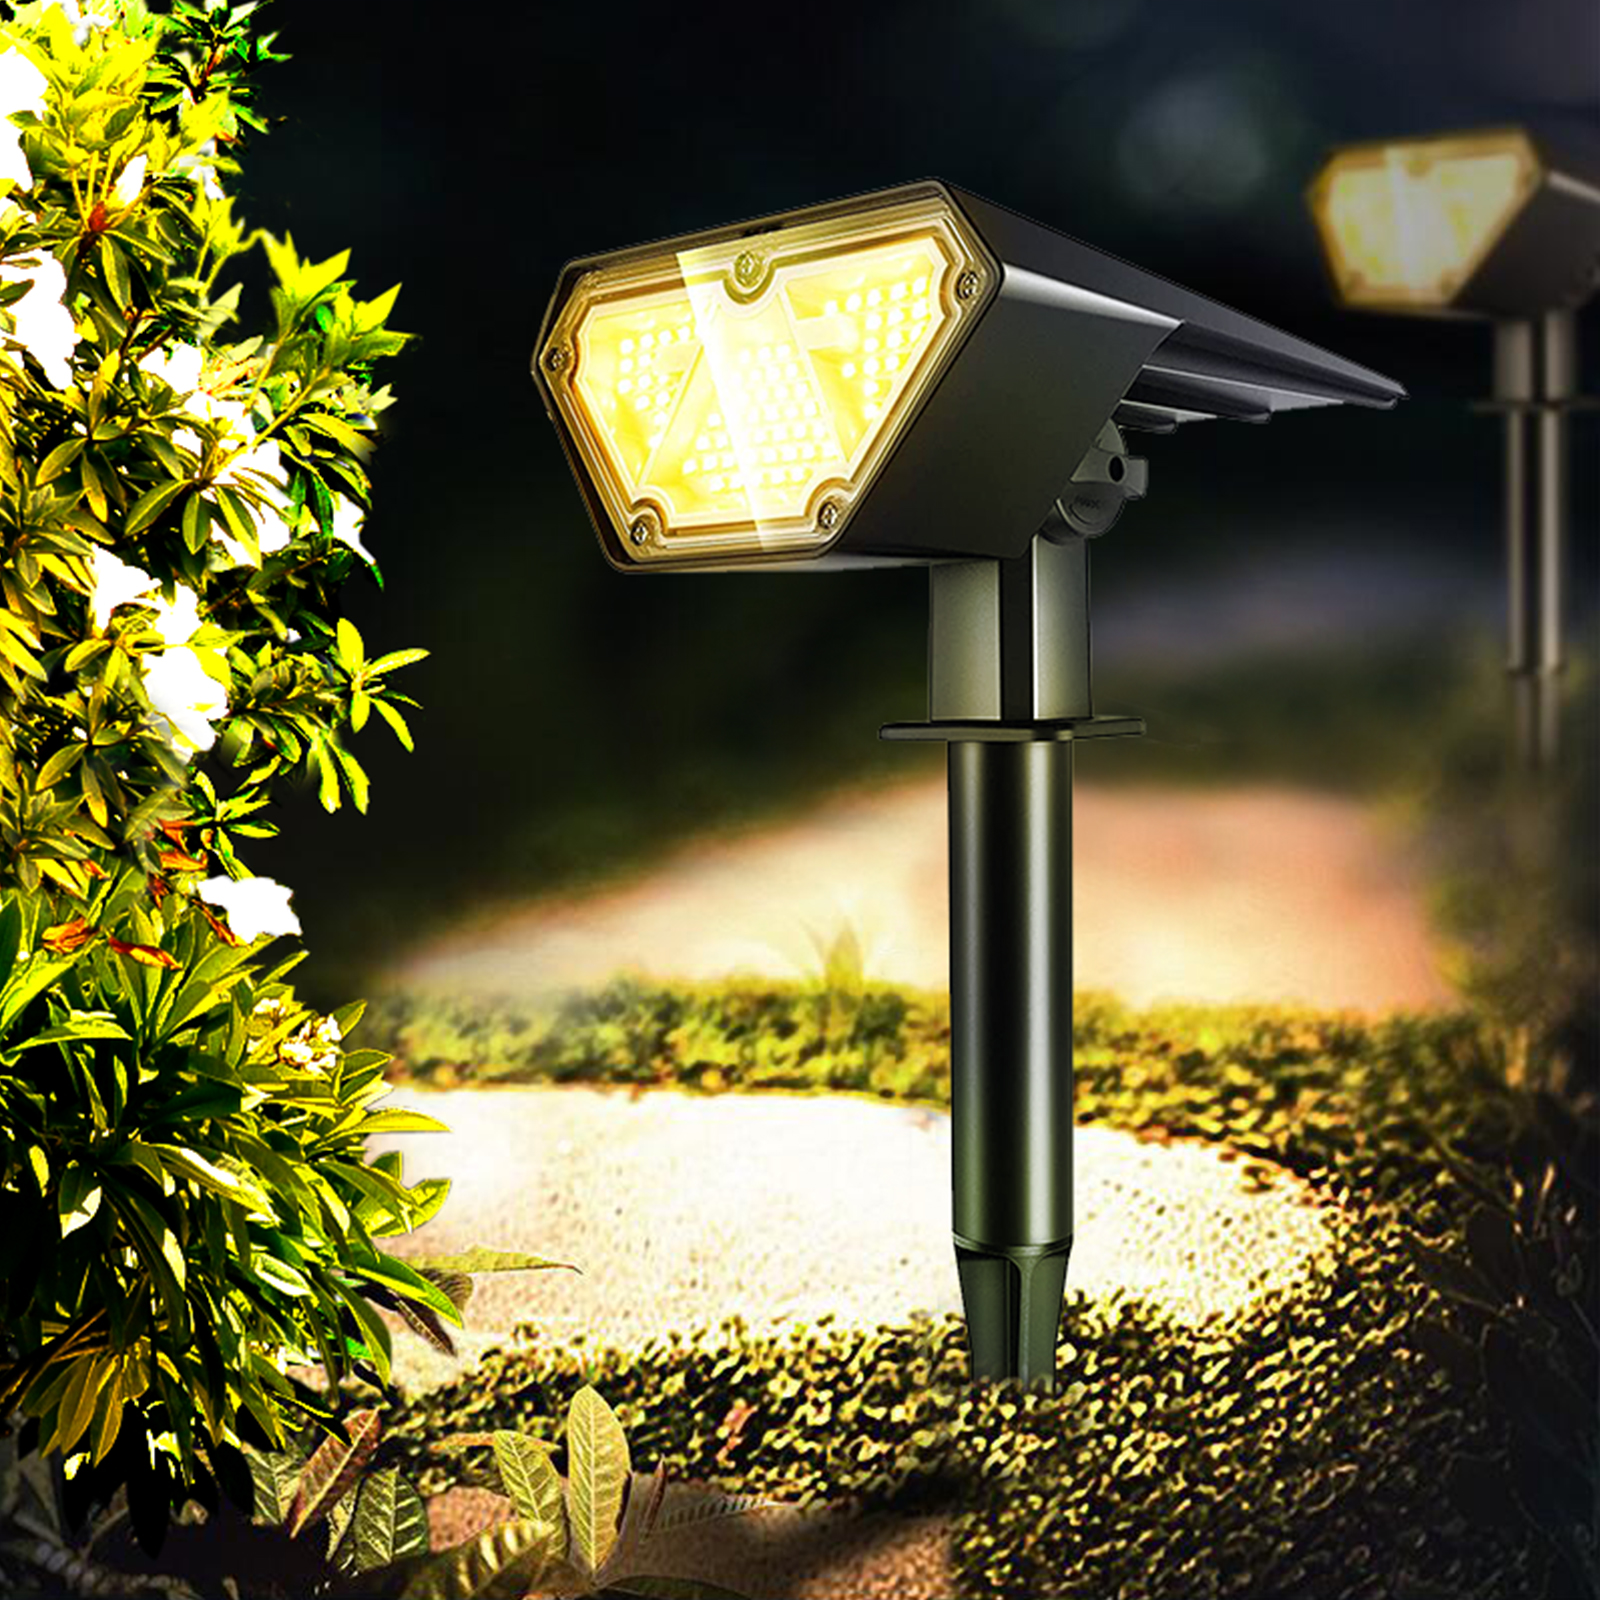 4PCS LED Solar Spotlight Adjustable 2 In 1 Landscape Stake Lights Wall Light Waterproof Outdoor Lights for Yard Walkway Patio Decoration Lamp Warm White & White